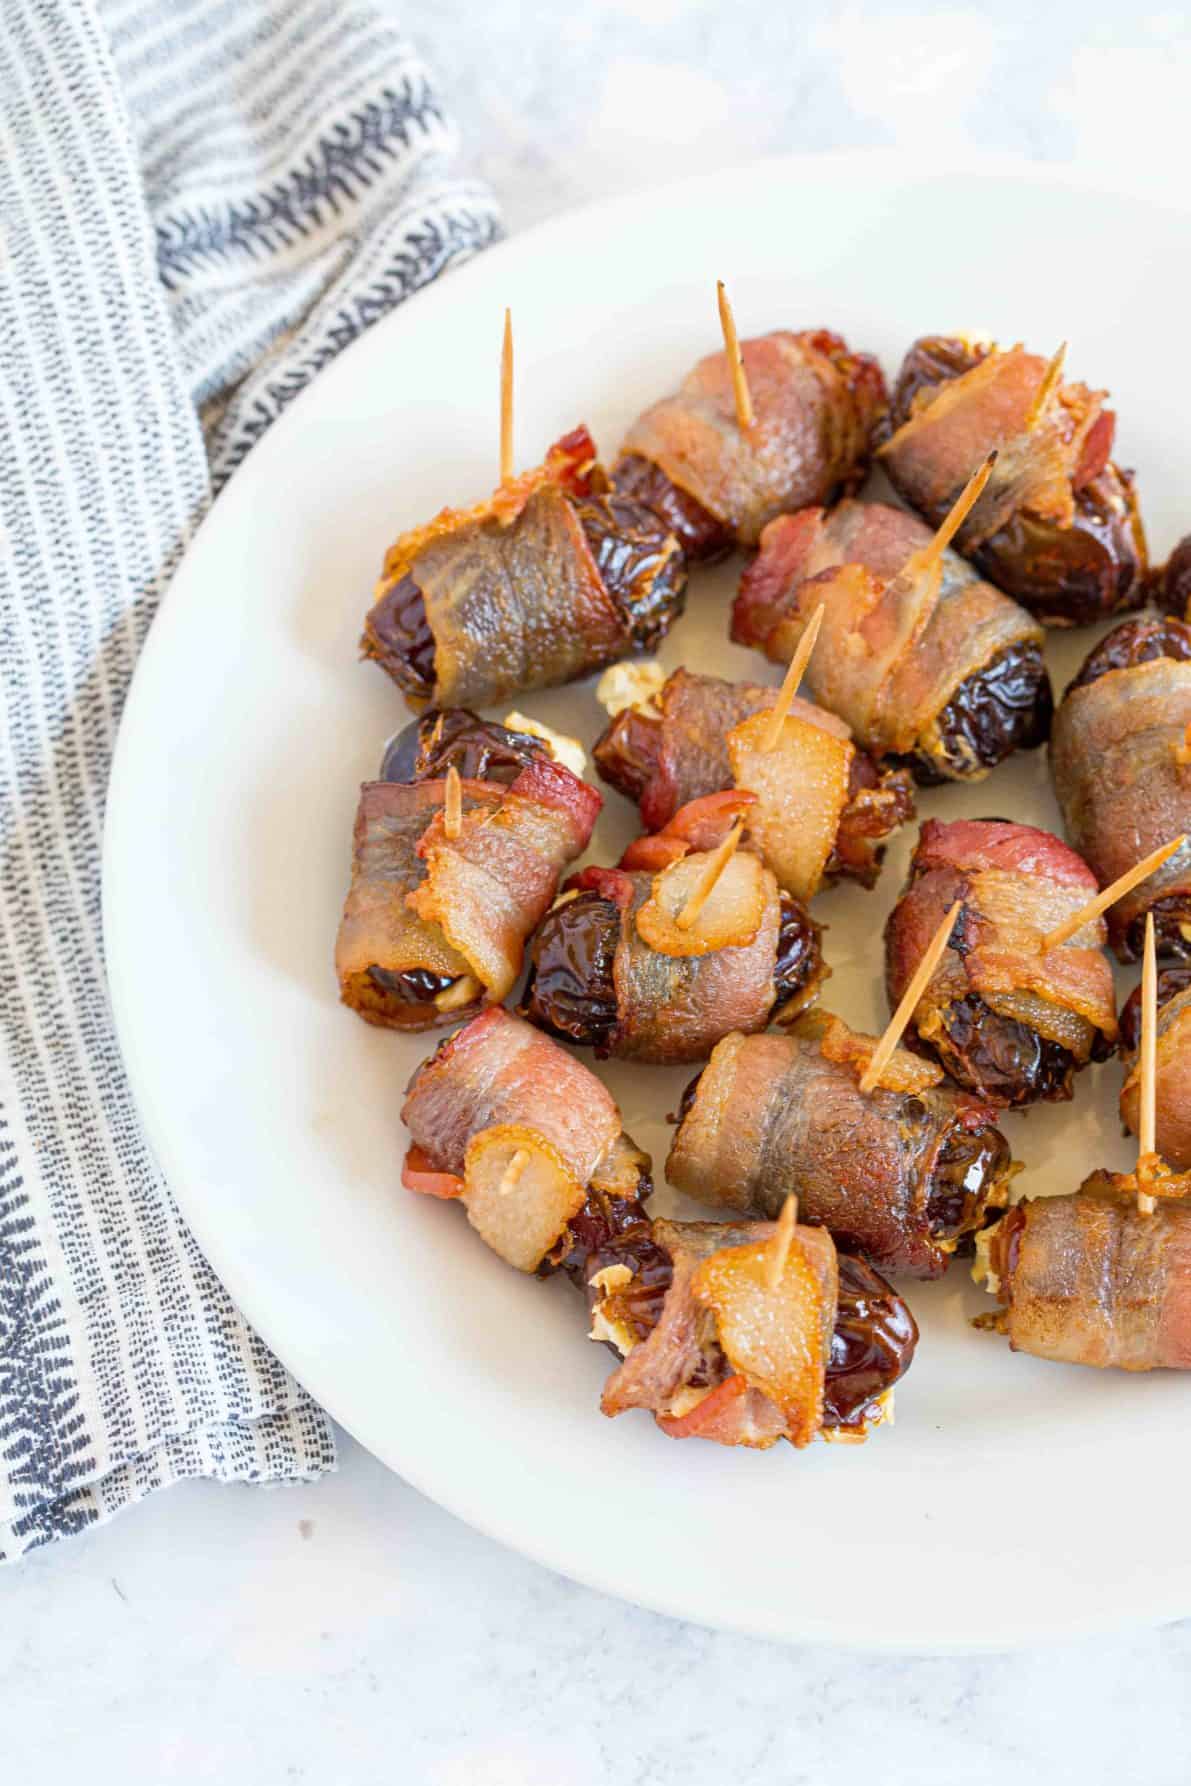 A plate of bacon wrapped dates with cream cheese.